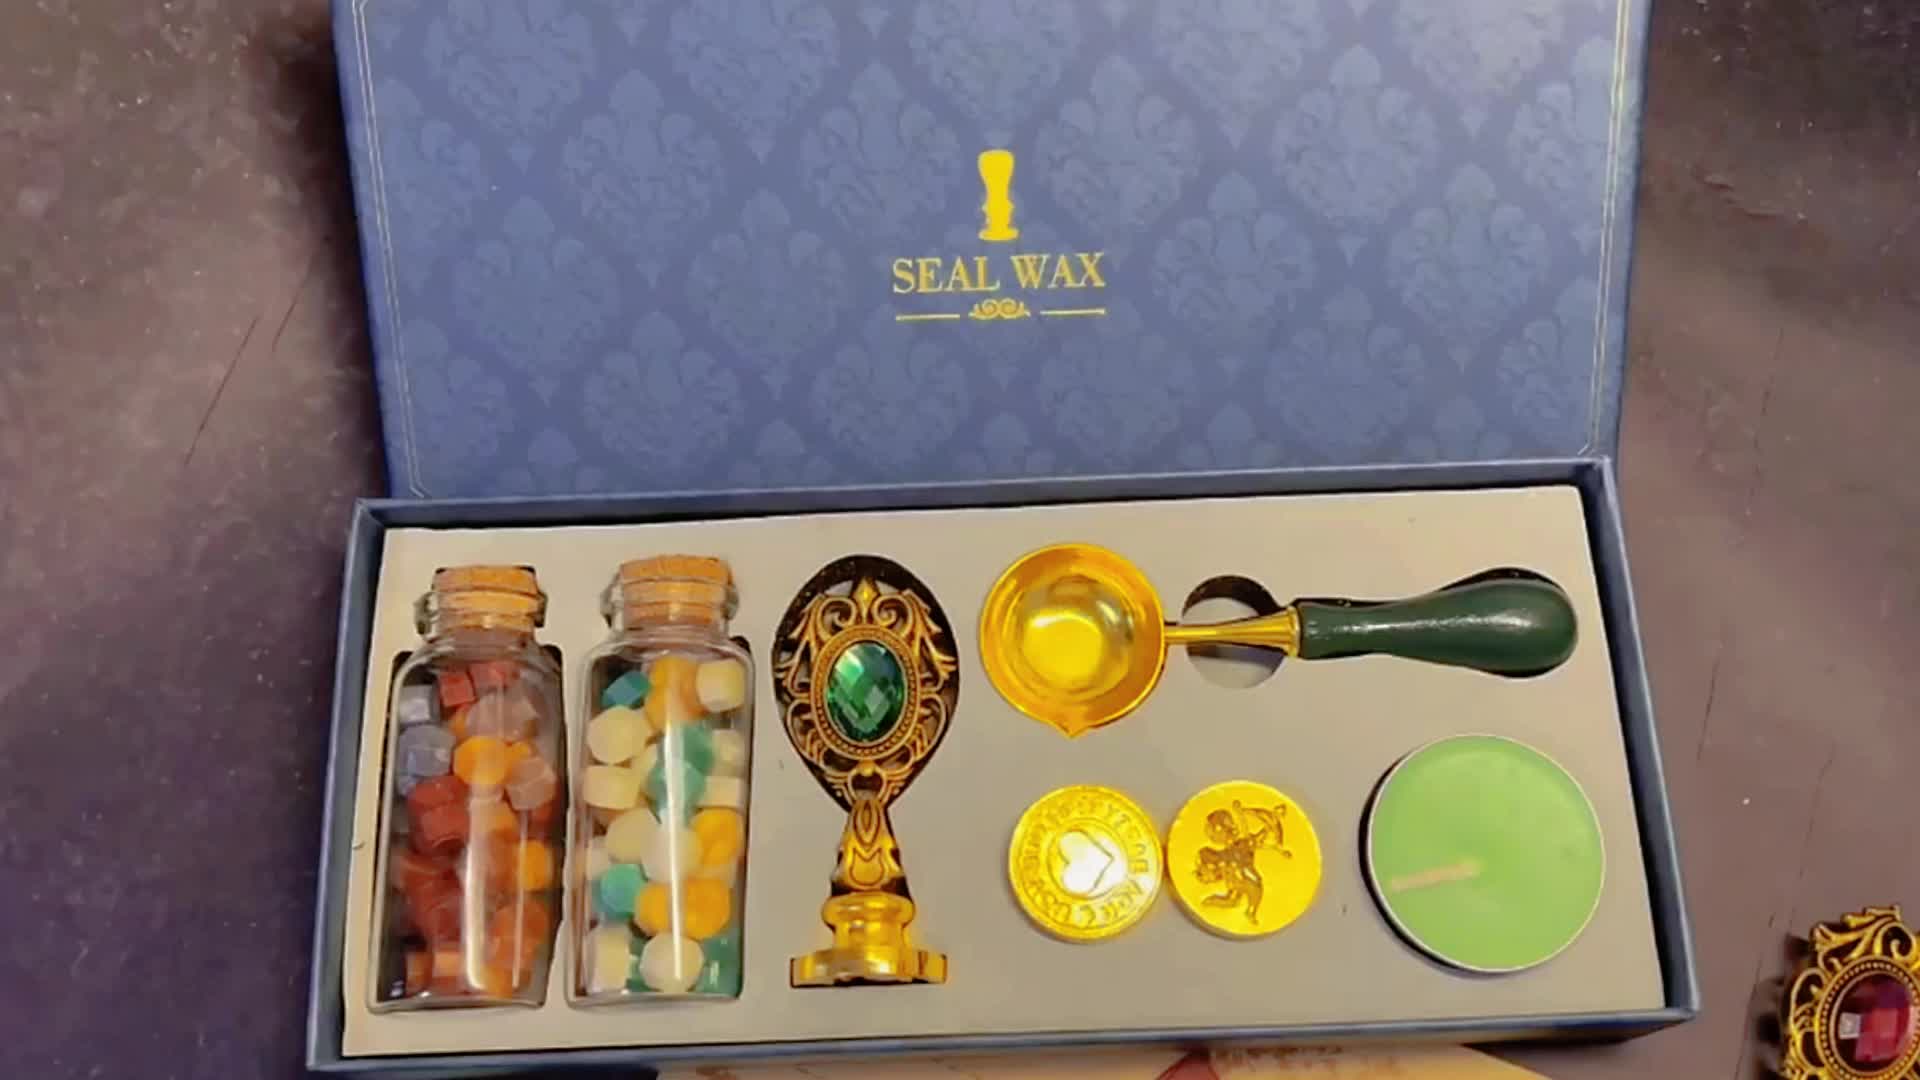 Wax Seal Stamp Kit with Gift Box, Wax Seal Beads with Wax Seal Stamp, Sealing  Wax Warmer, Wax Seal Metallic Pen and Envelope, Wax Seal Kit for Gift and  Decoration,，G202835 